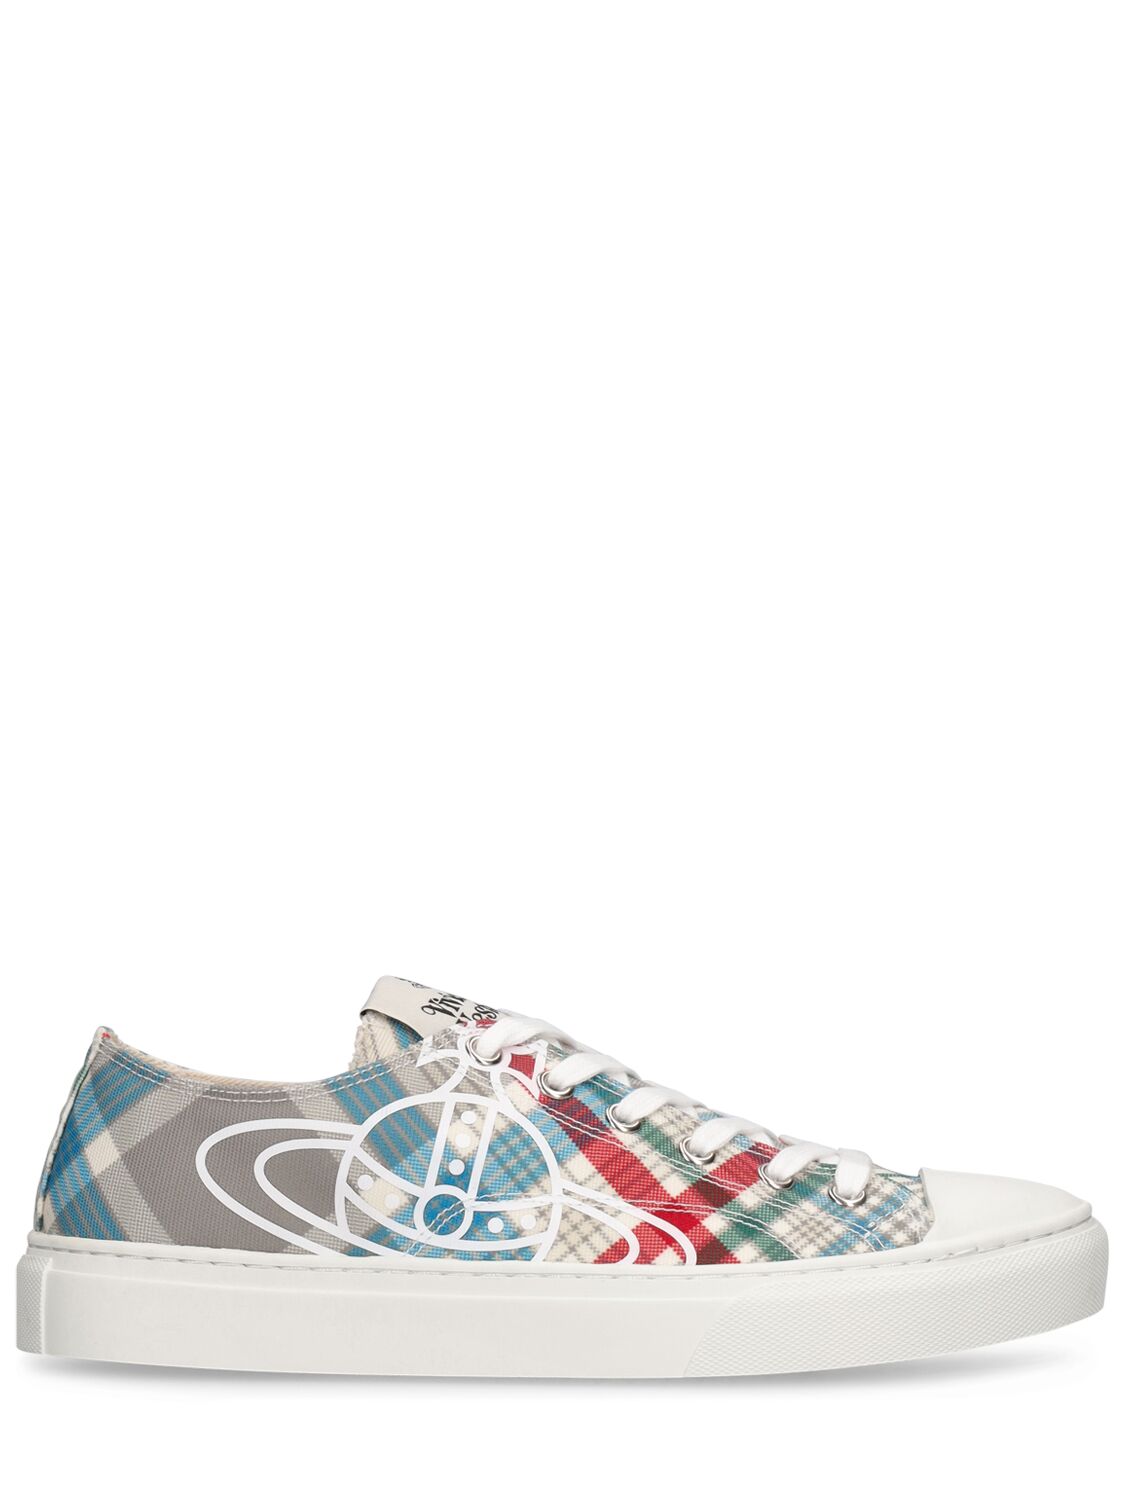 10mm Plimsoll Canvas Sneakers image